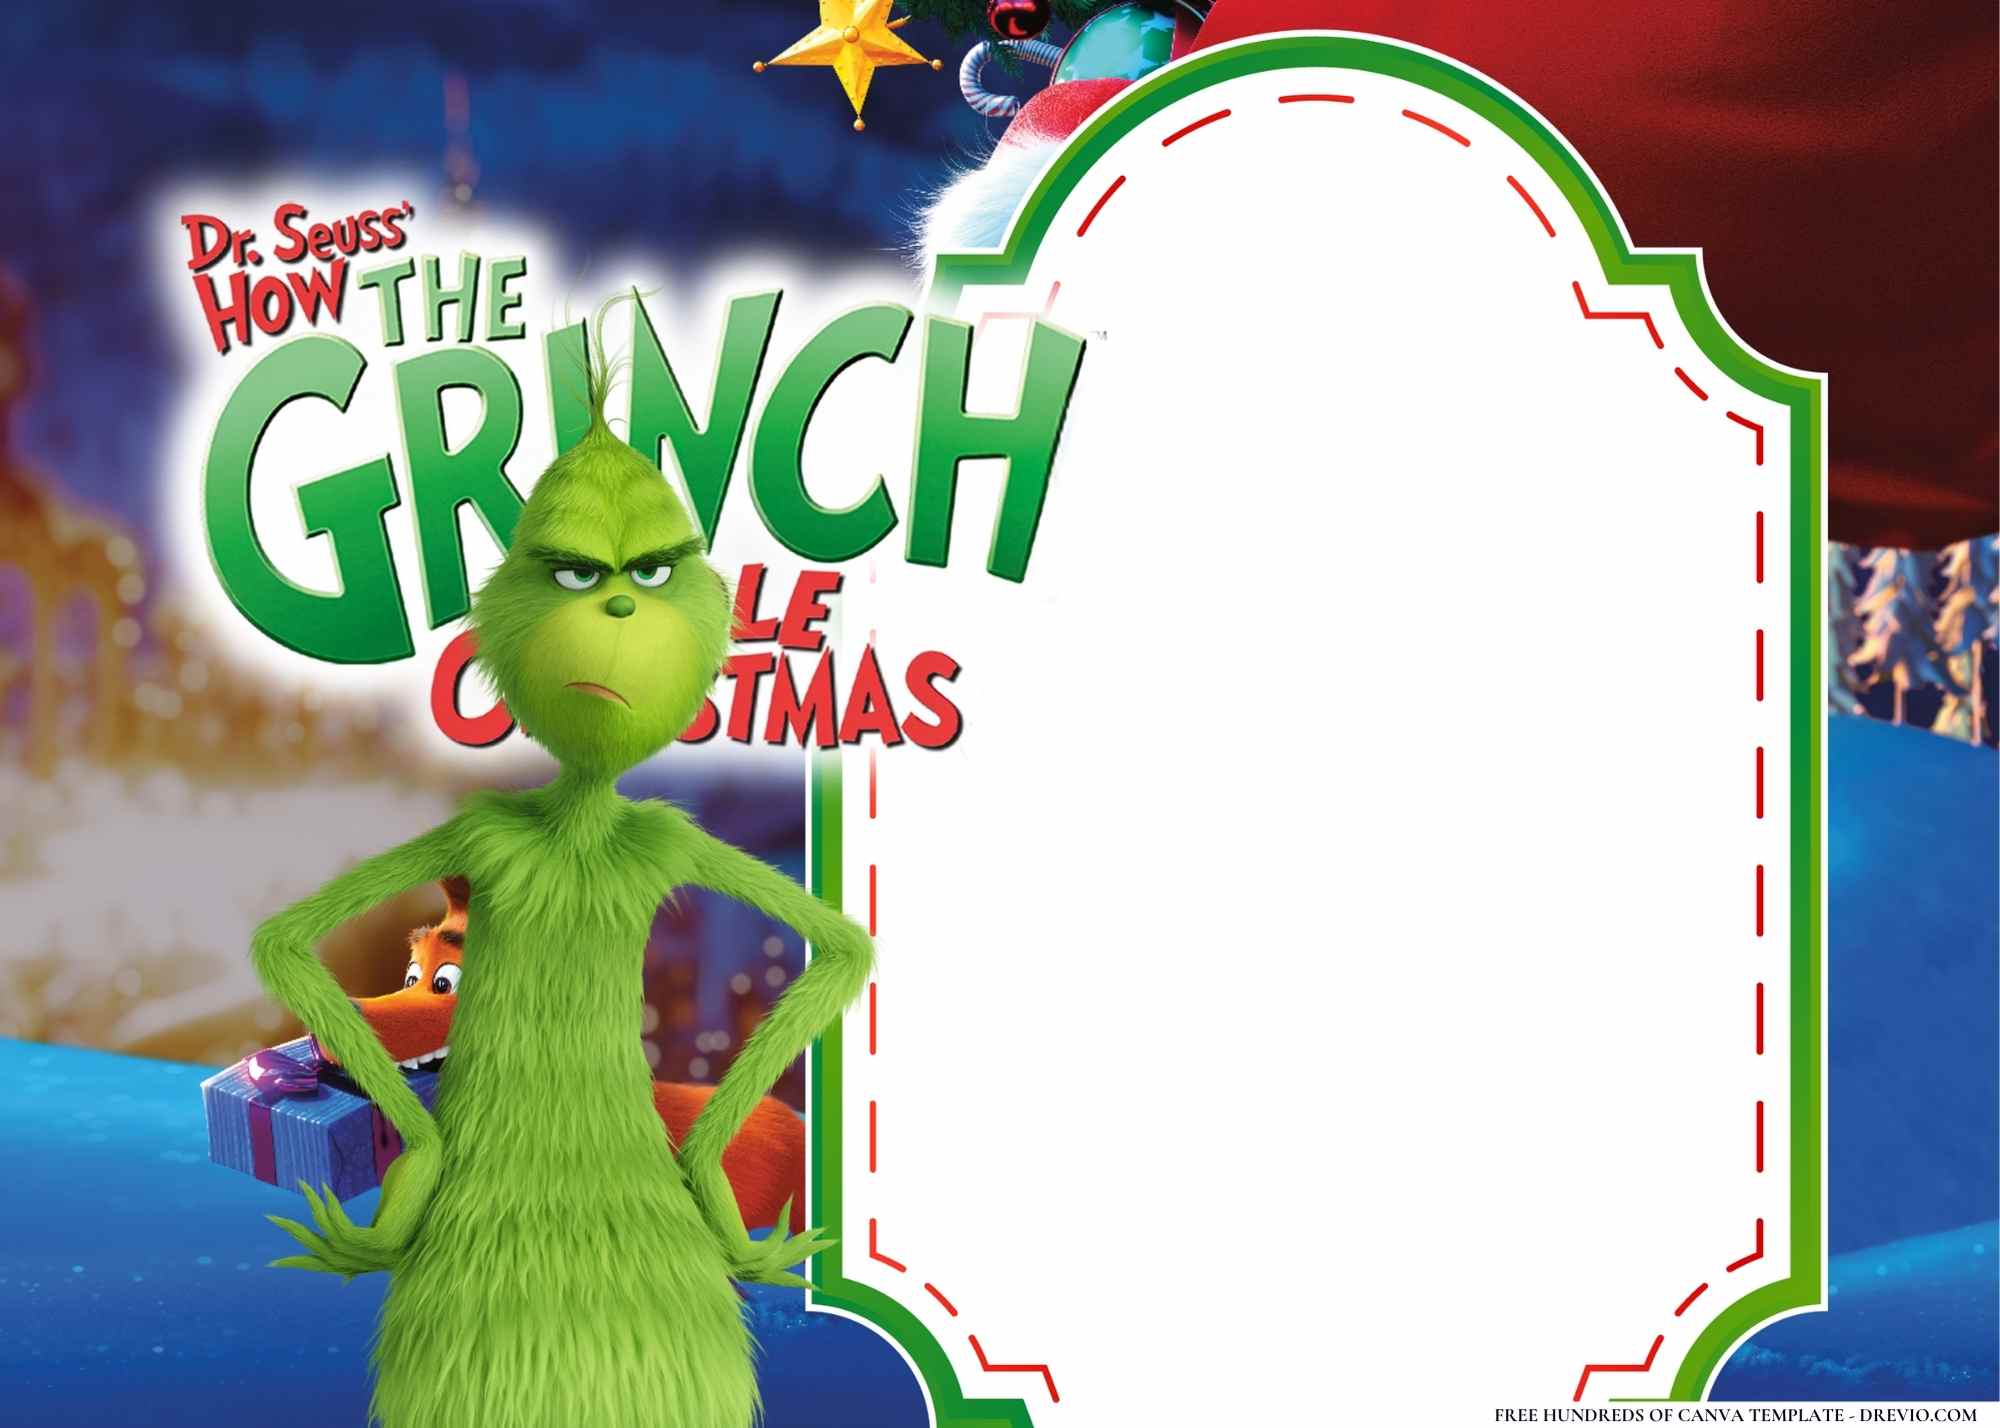 FREE-The Grinch-Birthday-Canva-Templates (10) | Download Hundreds FREE ...